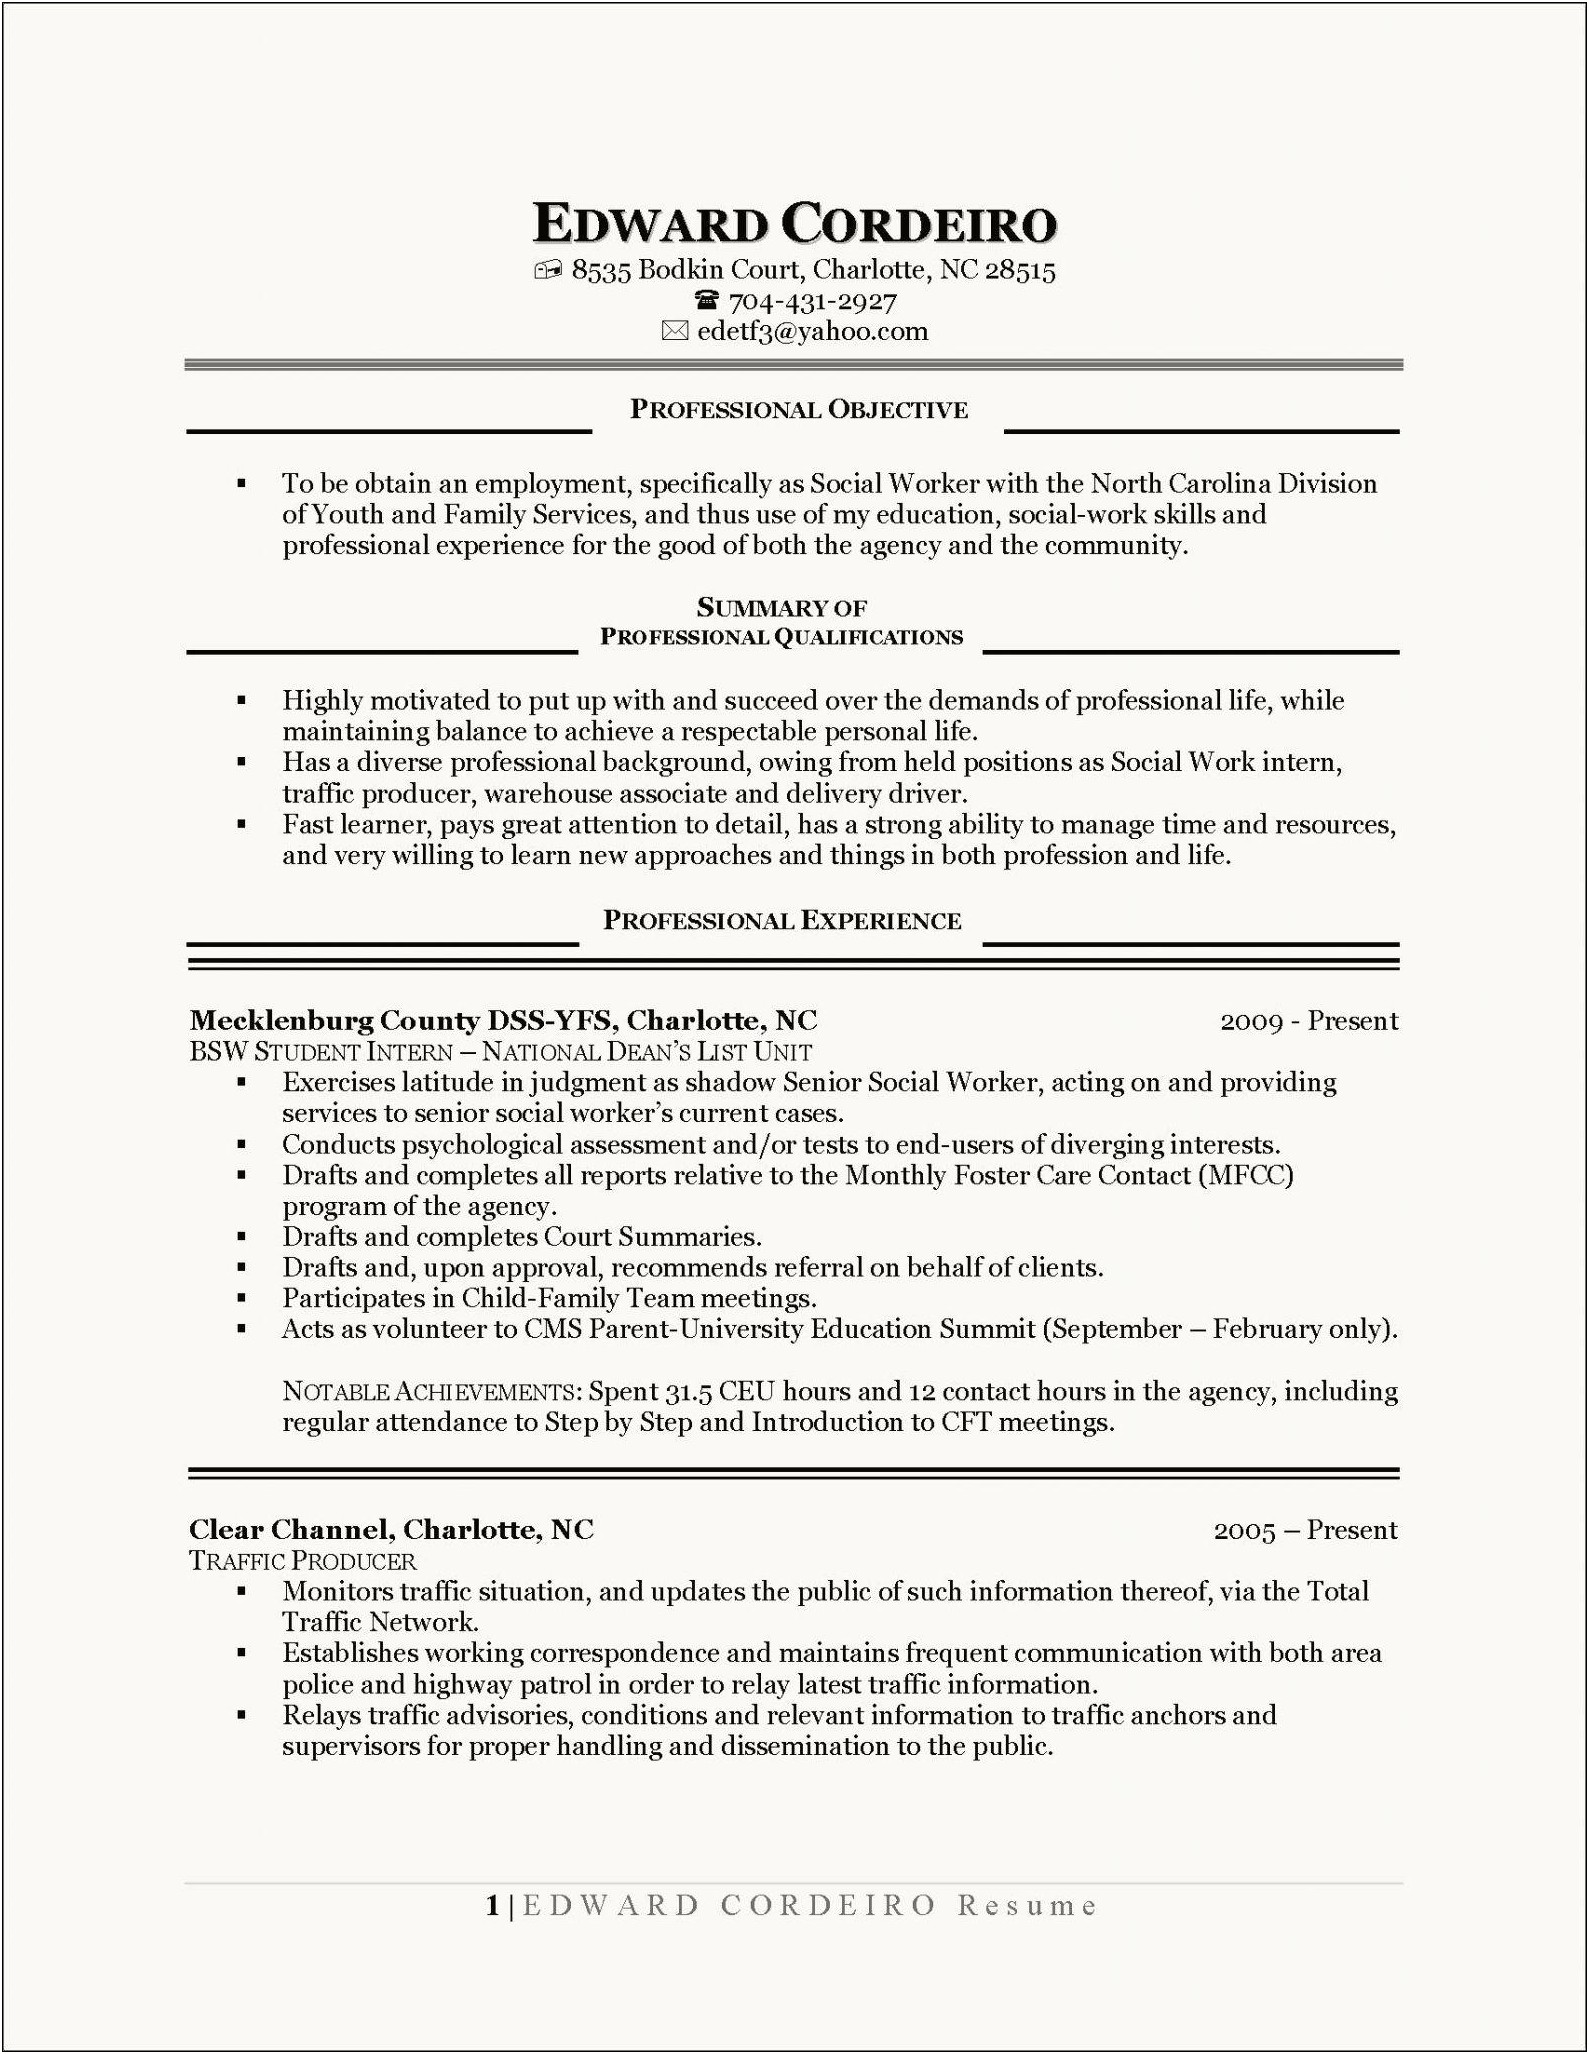 Good Highlights Of Qualifications On Resume